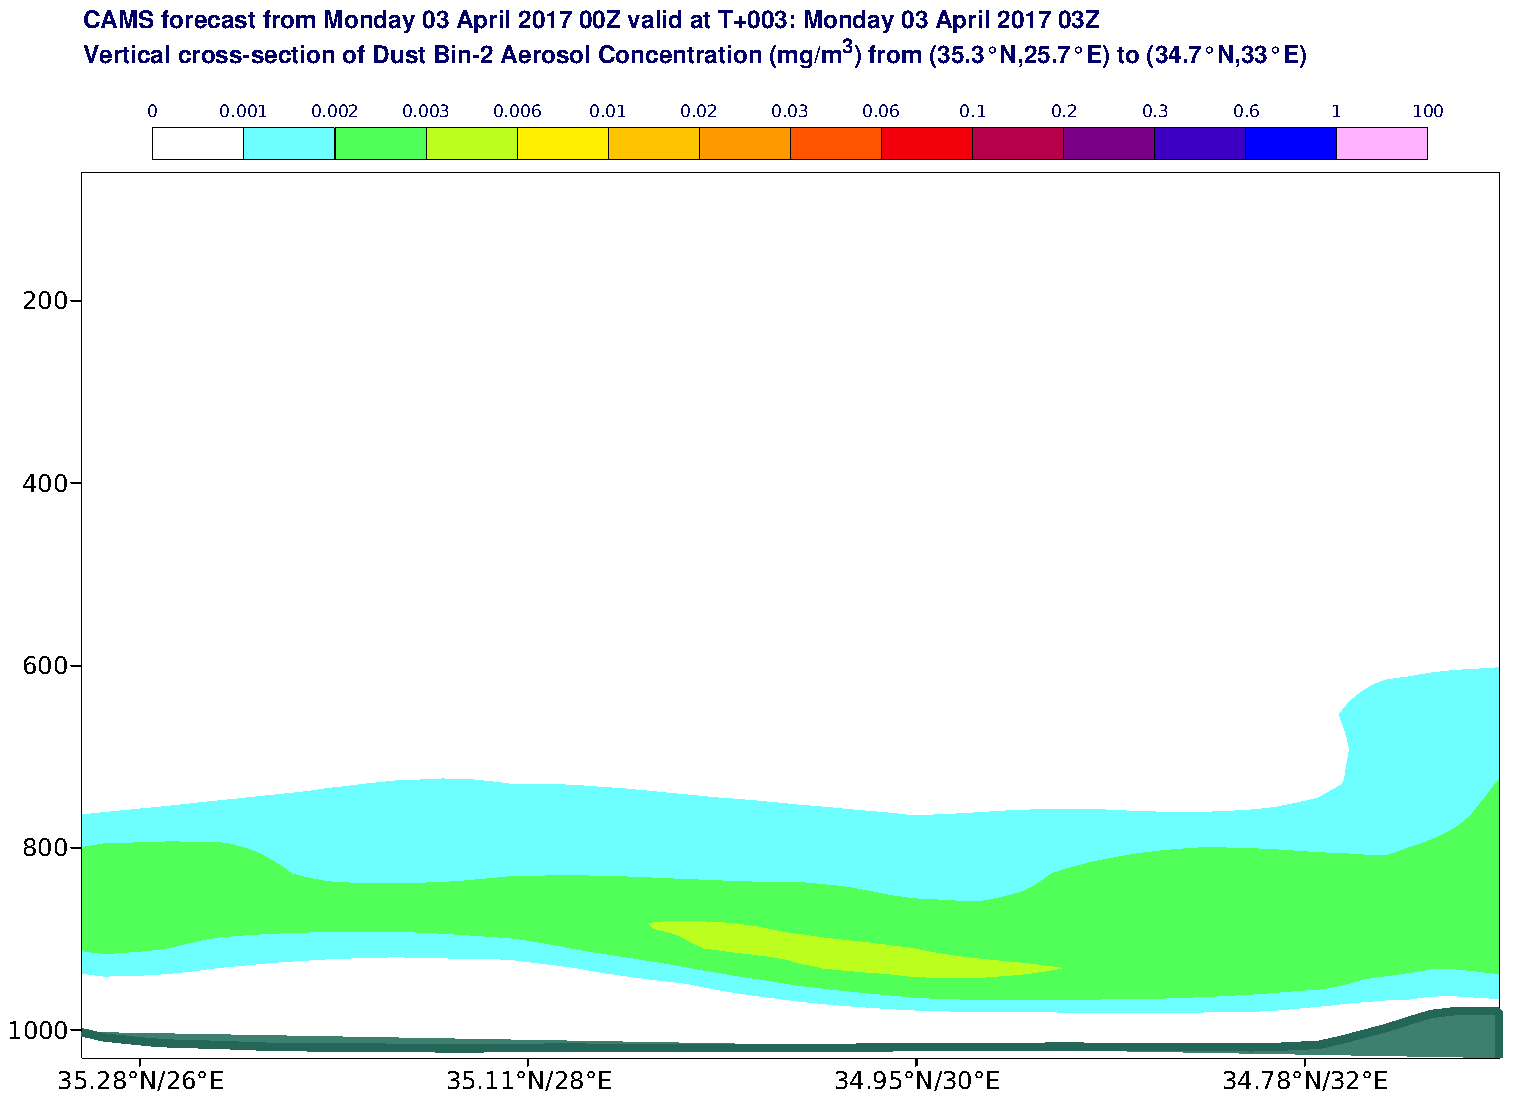 Vertical cross-section of Dust Bin-2 Aerosol Concentration (mg/m3) valid at T3 - 2017-04-03 03:00